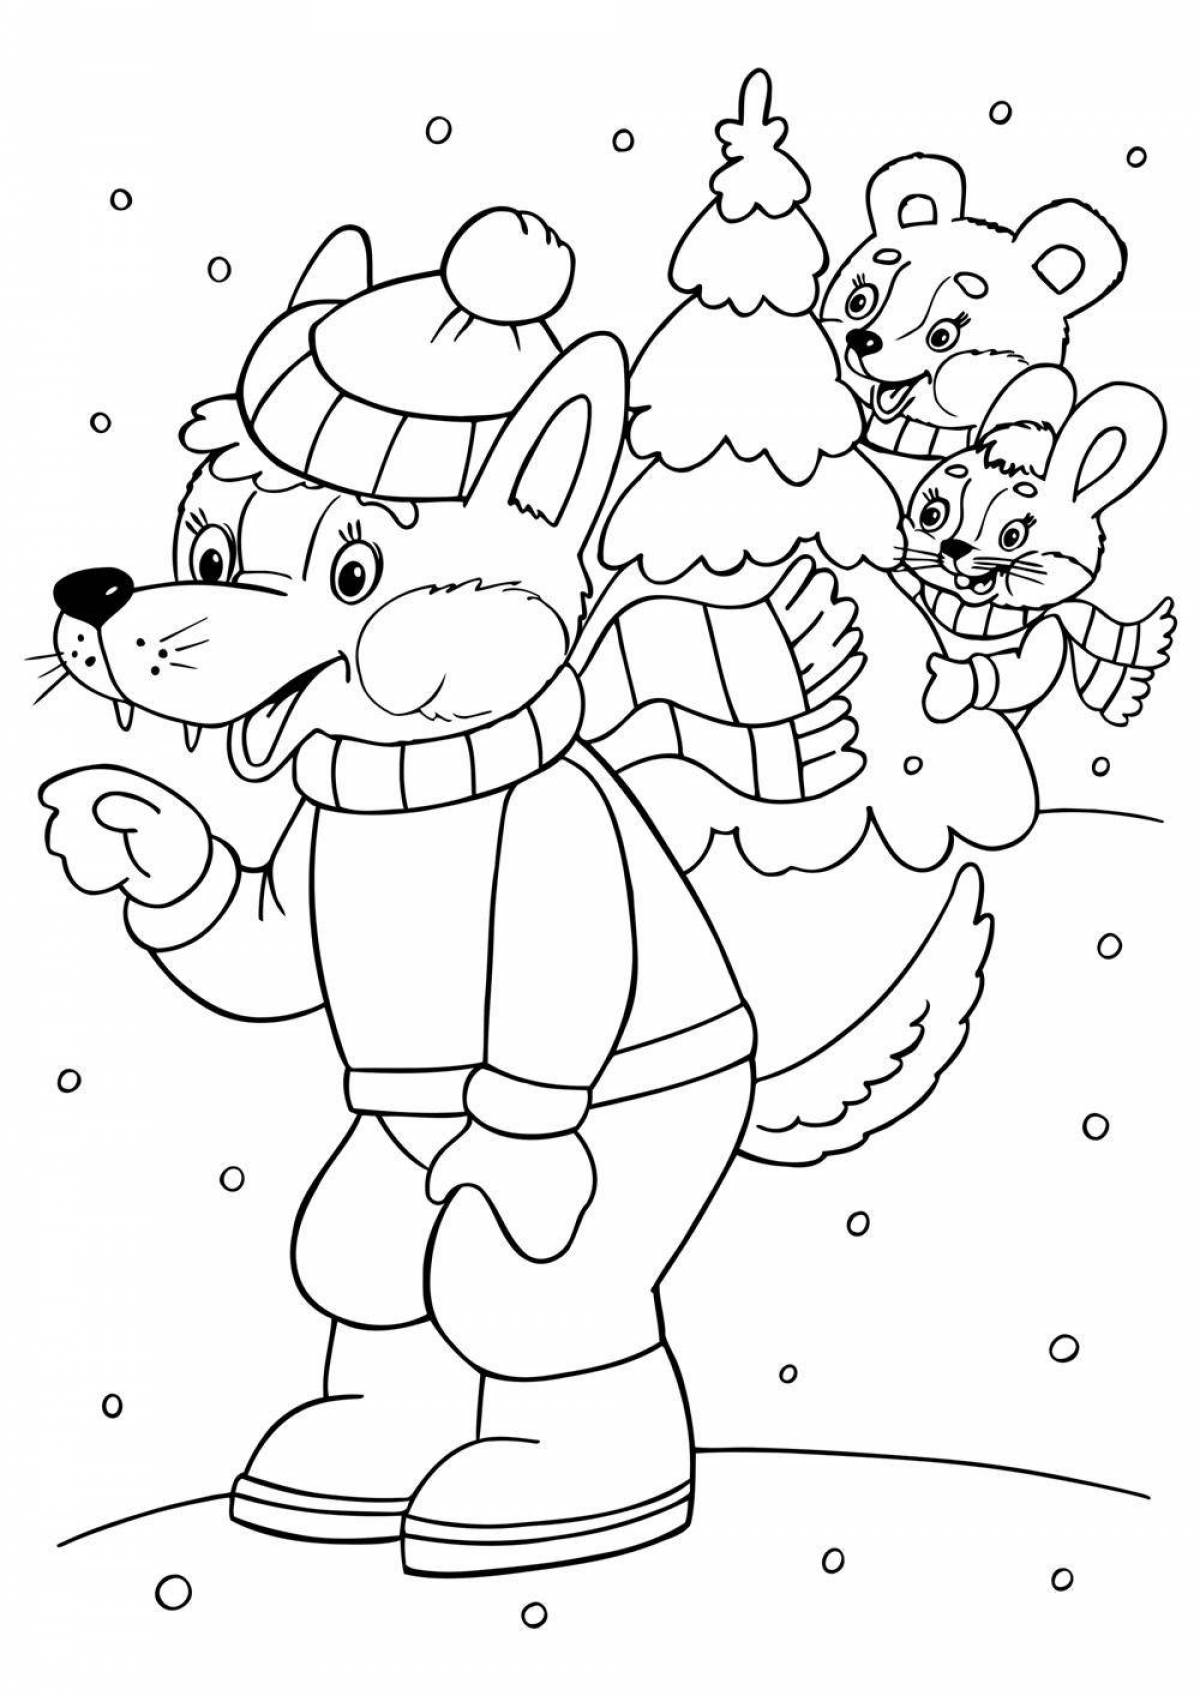 Fabulous Christmas coloring book for children 8-9 years old